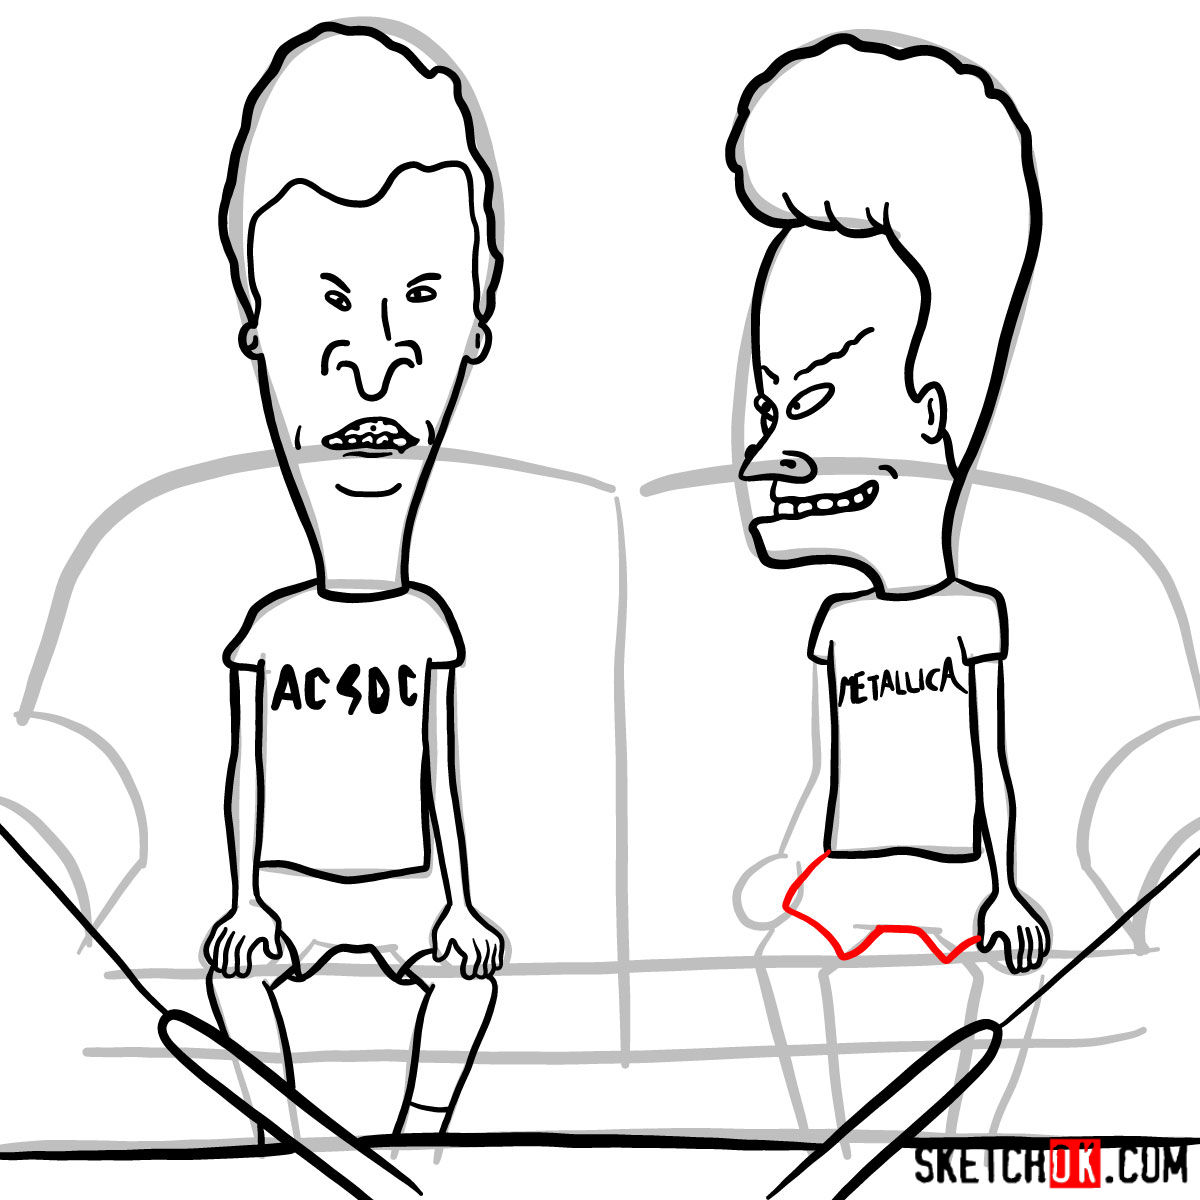 How to draw Beavis and Butt-Head - step 16